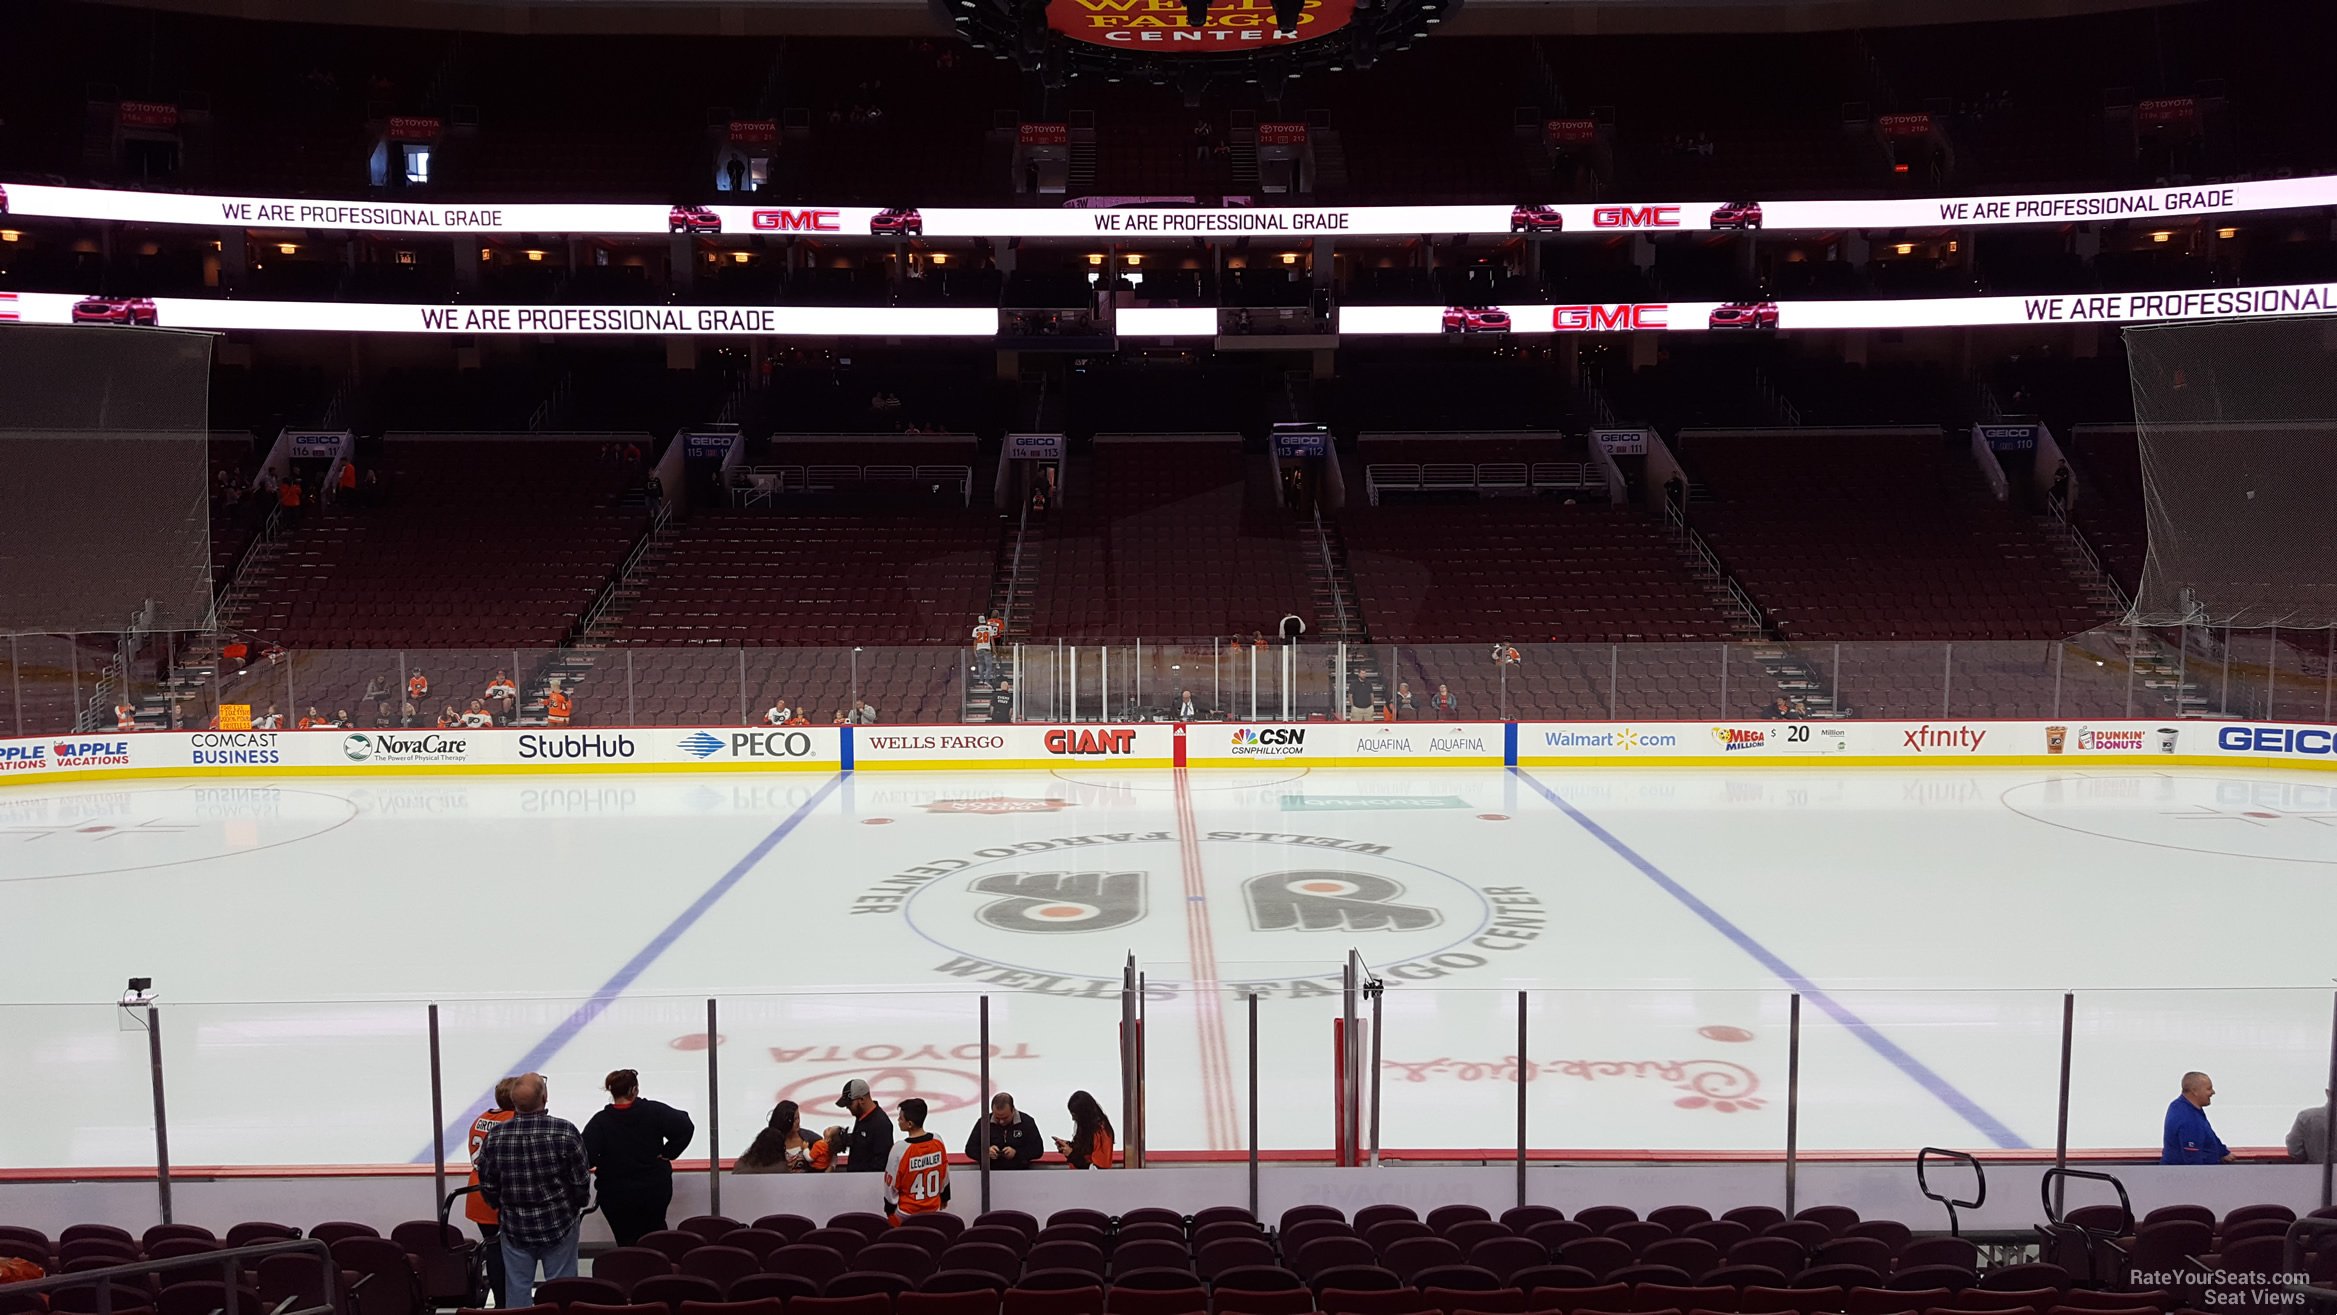 section 101, row 17 seat view  for hockey - wells fargo center